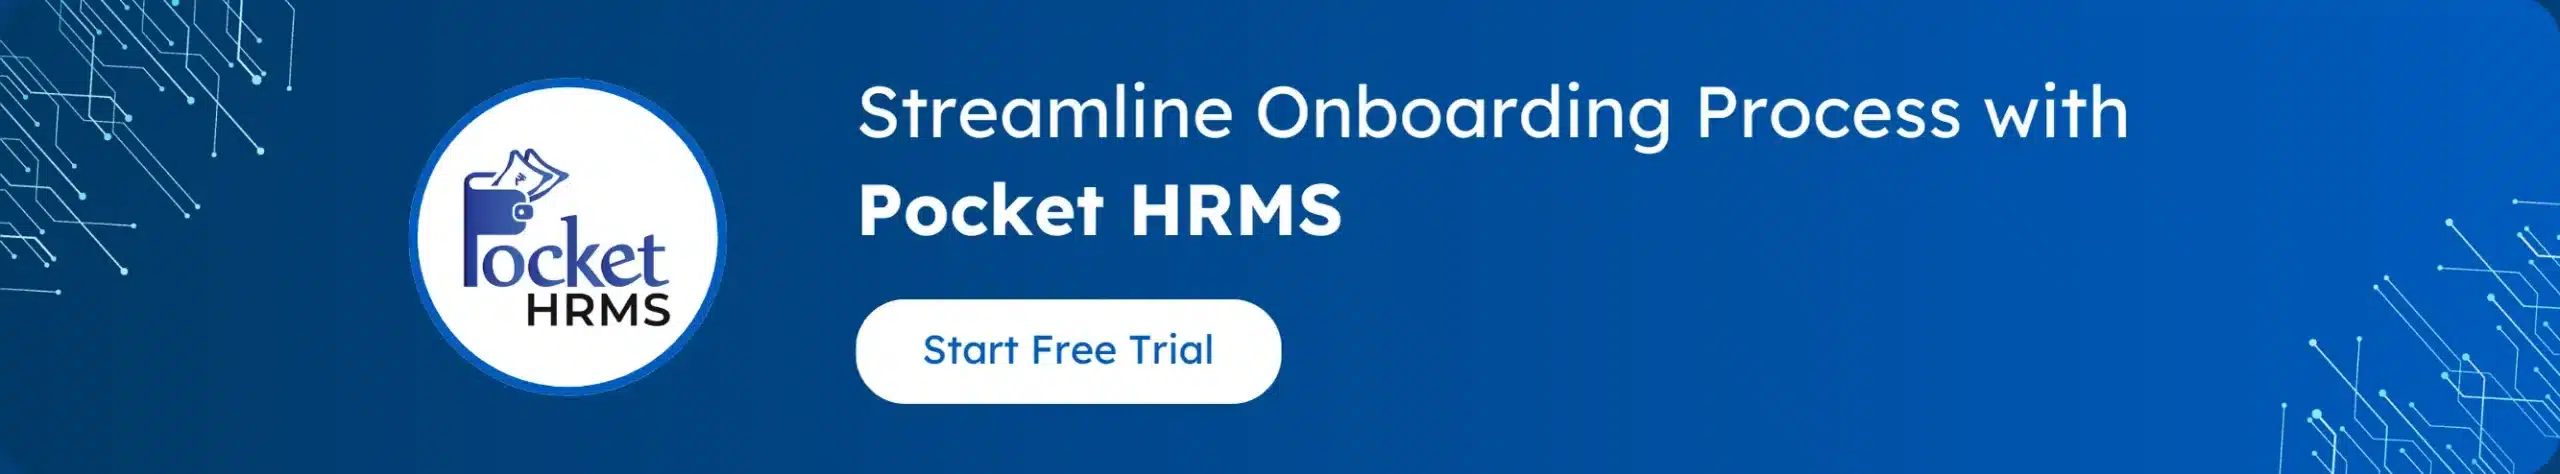 Streamline Onboarding Process with Pocket HRMS